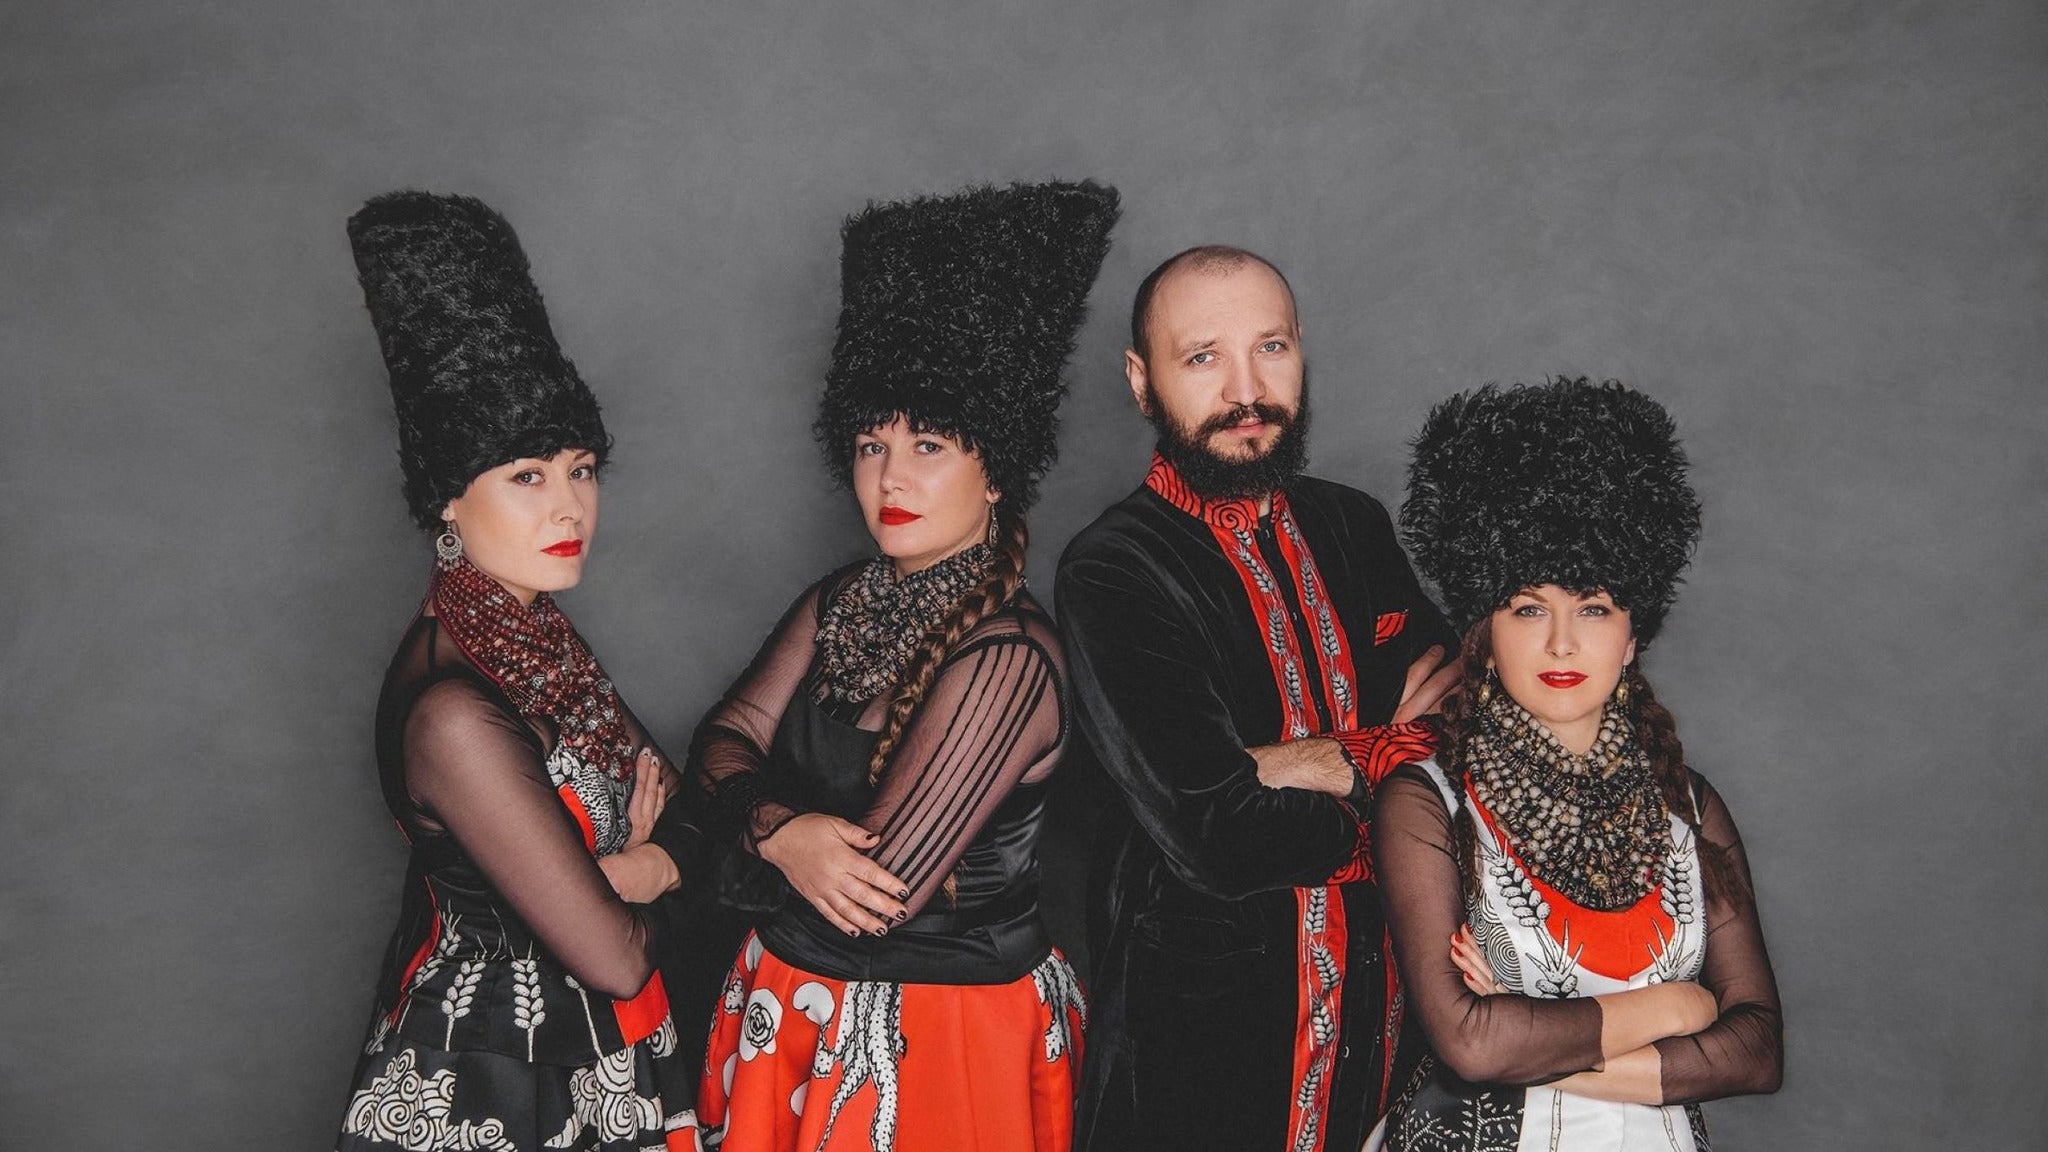 presale password for DakhaBrakha tickets in Bethel - NY (Bethel Woods Center for the Arts)